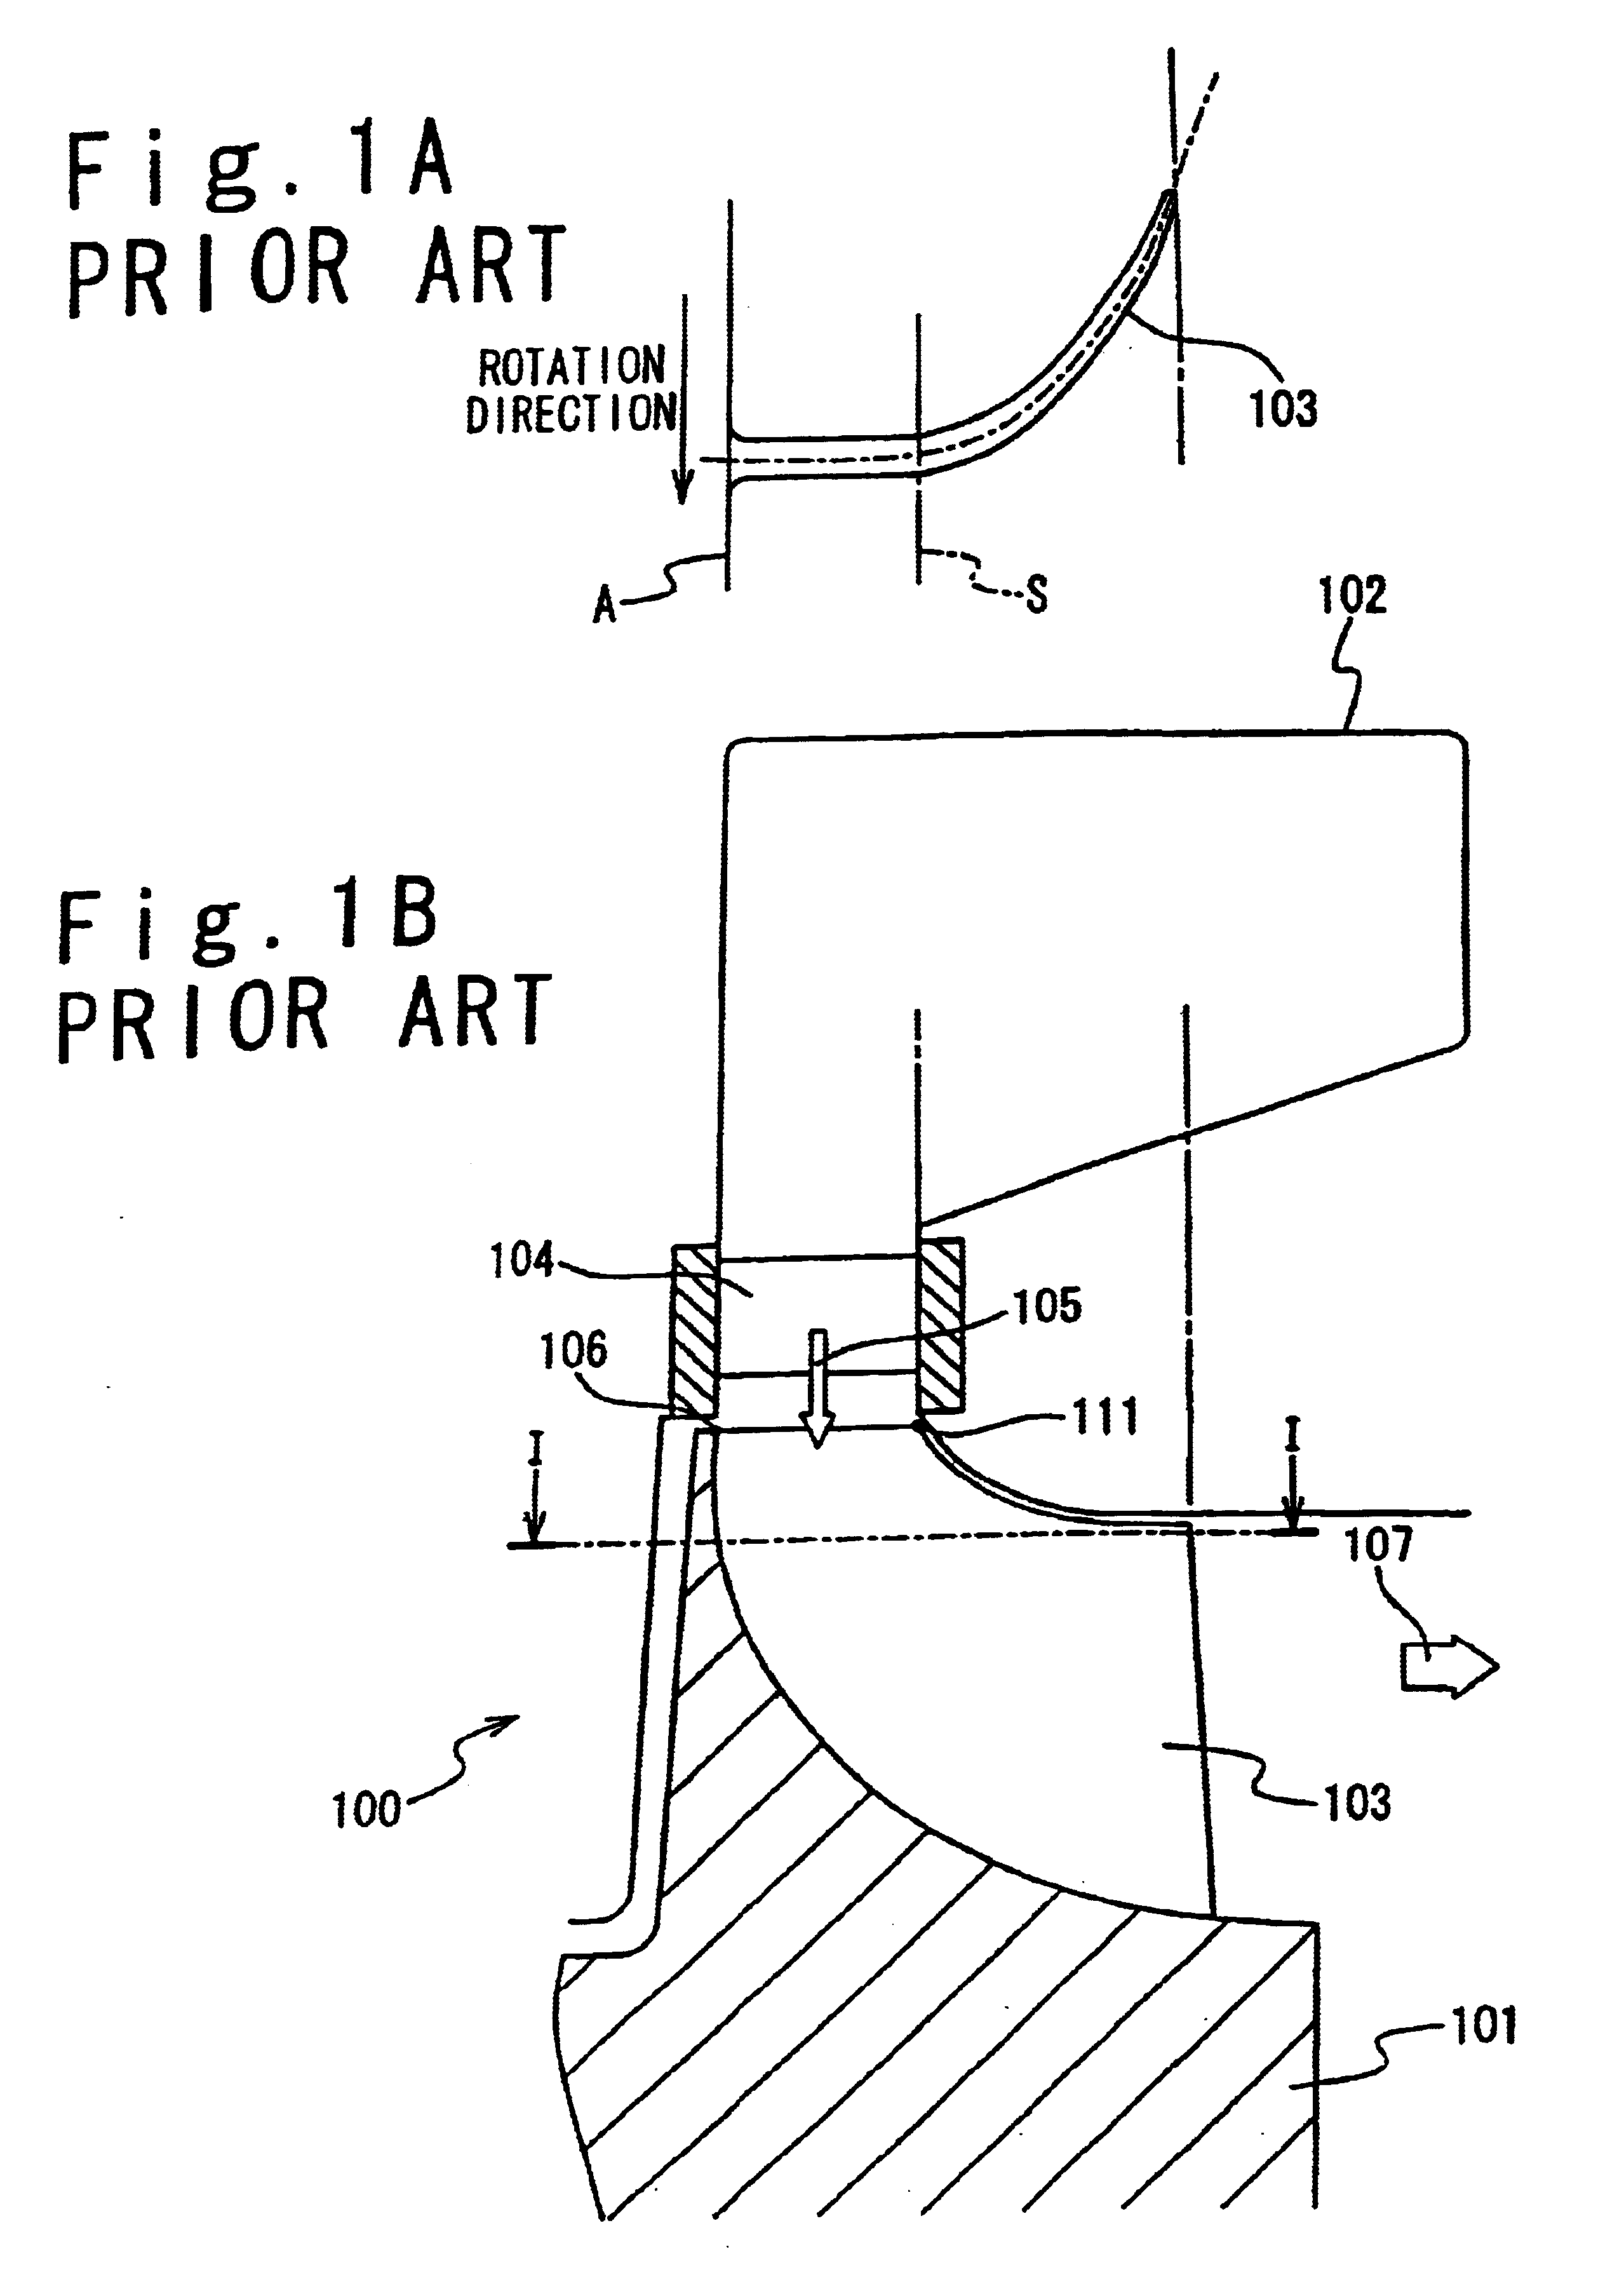 Mixed flow turbine and mixed flow turbine rotor blade